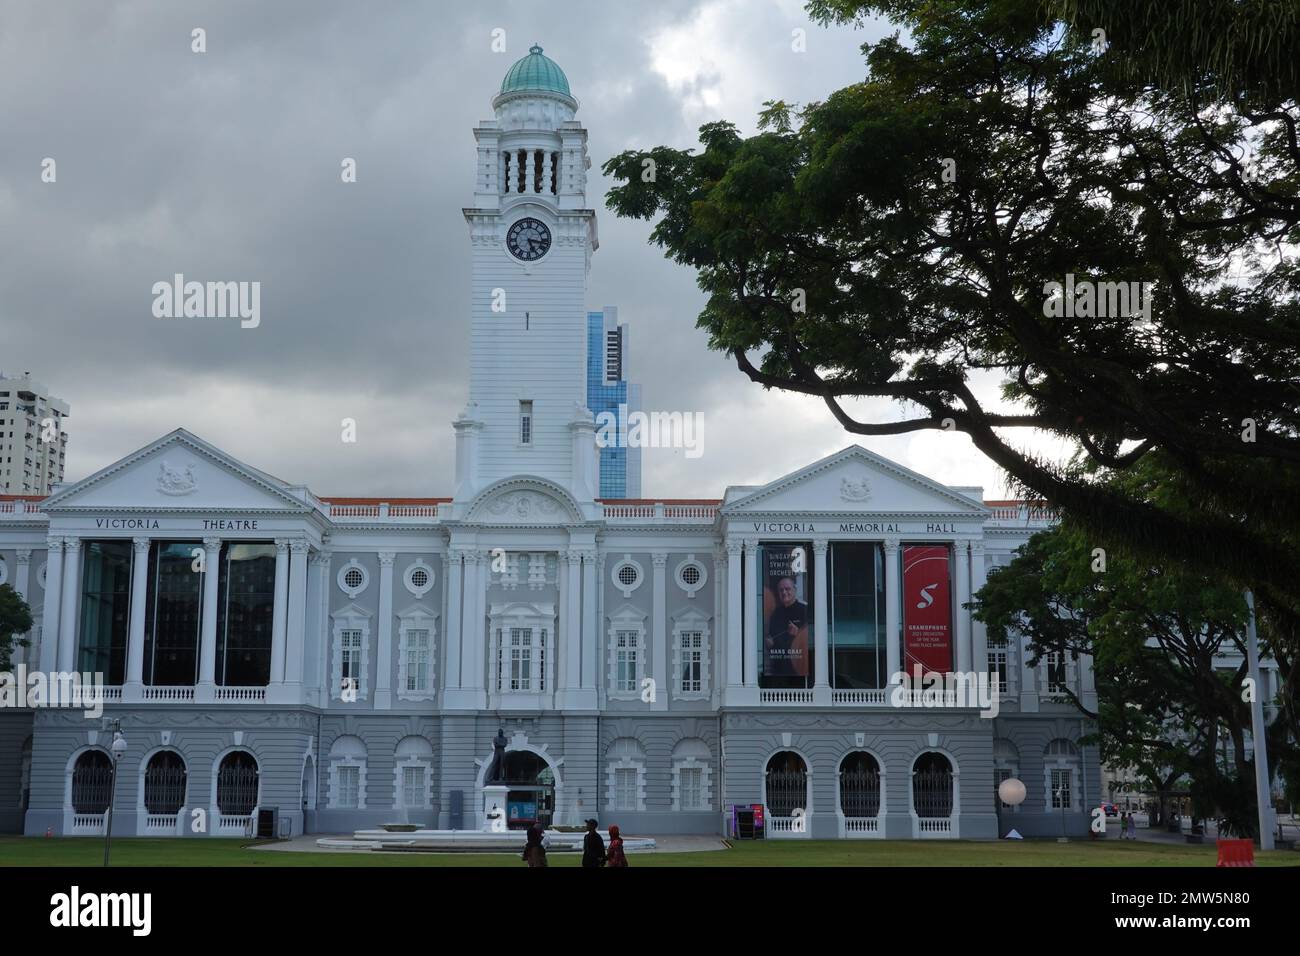 The old Singapore Town Hall now the Victoria Theatre and Victoria Concert Hall, historic Civic District, Singapore Stock Photo